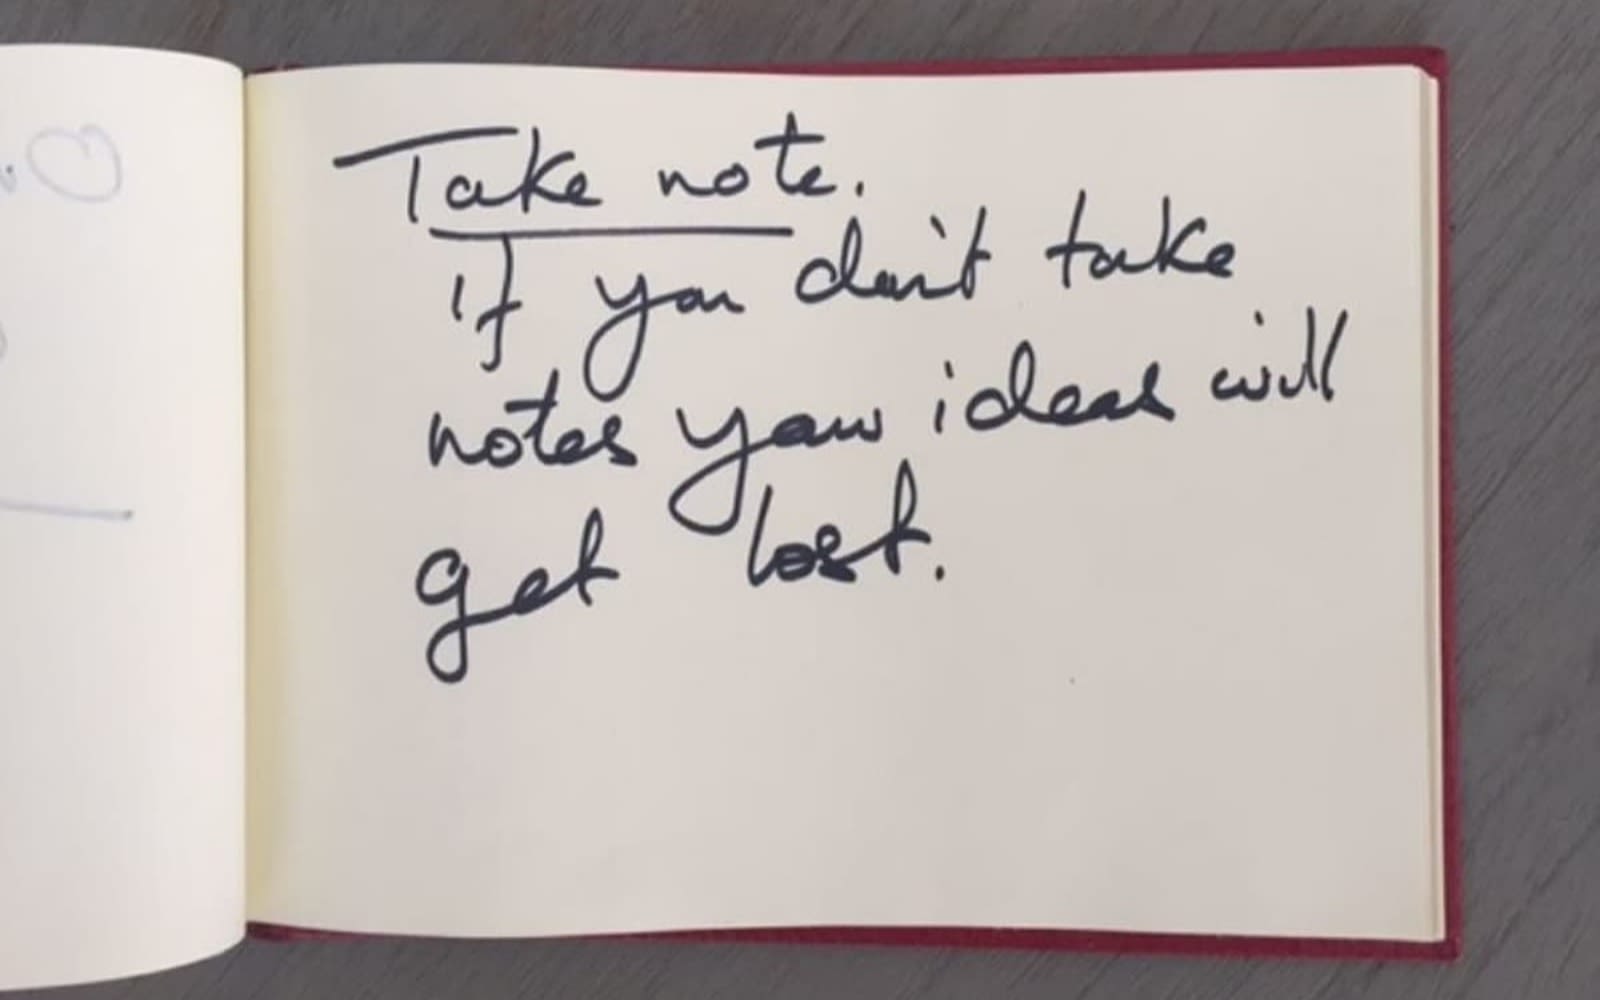 Take note: if you don't take notes your ideas will be lost - Richard Branson